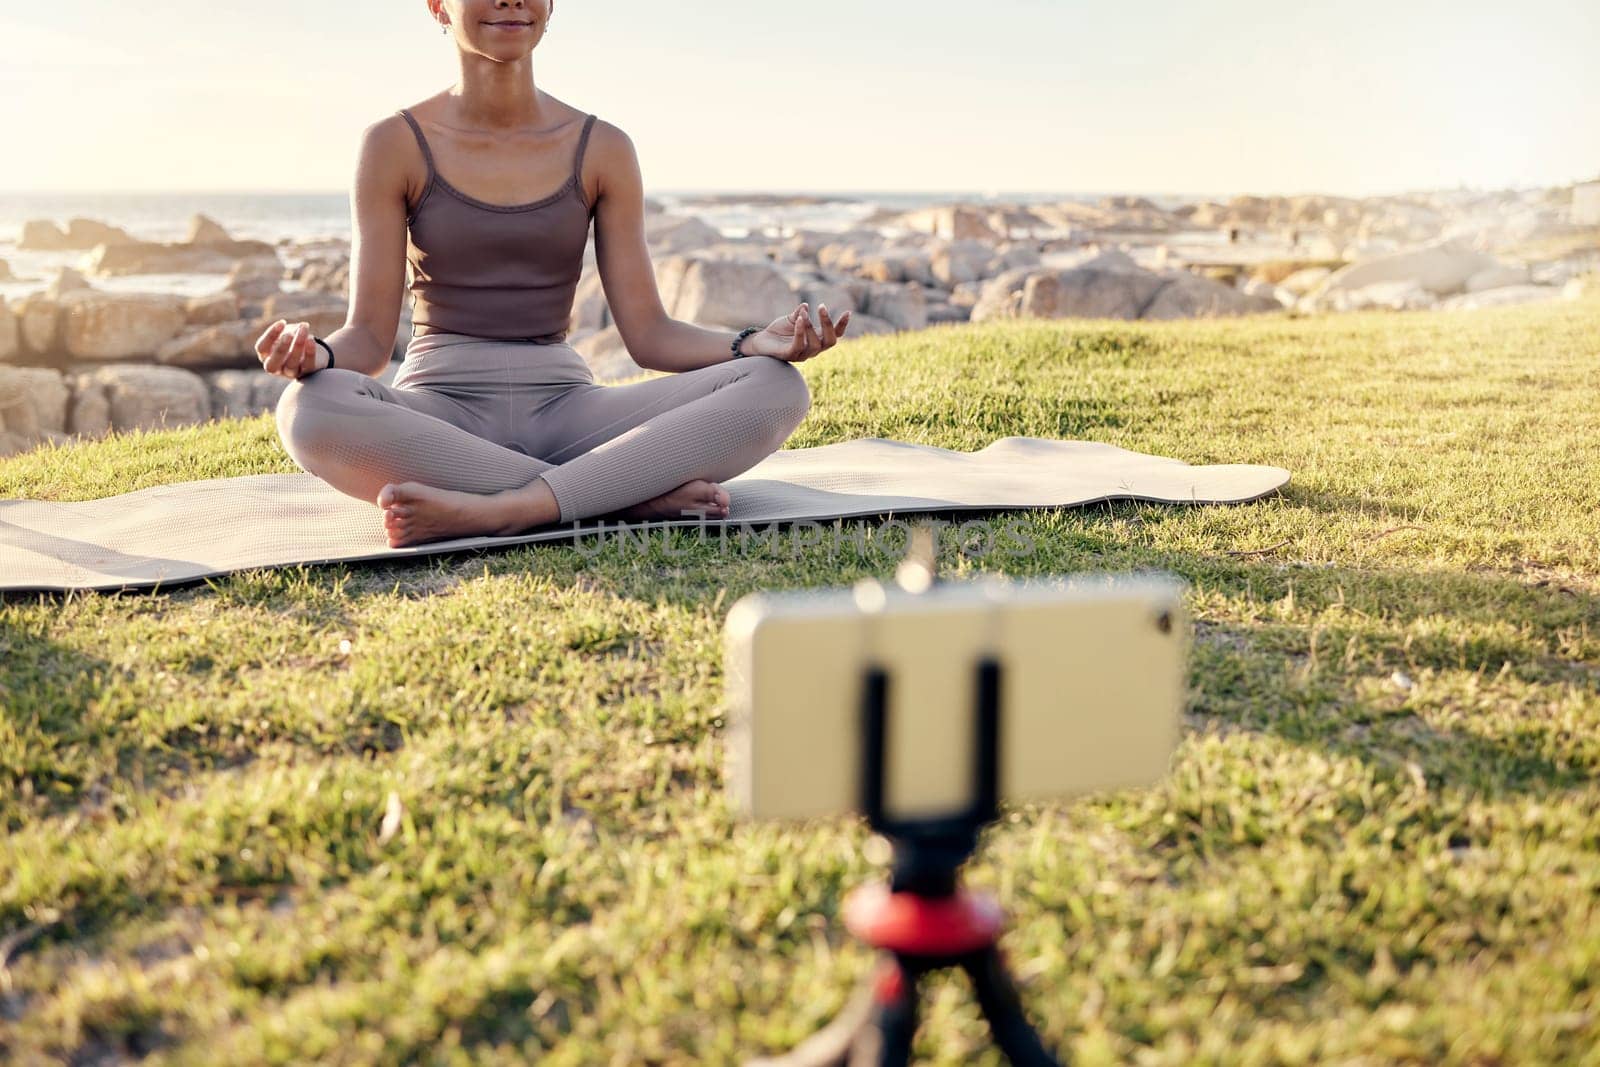 Yoga, meditation and live streaming woman in nature on smartphone for peace, healing and mindfulness content creation on social media. Influencer or fitness content creator meditate outdoor on video.